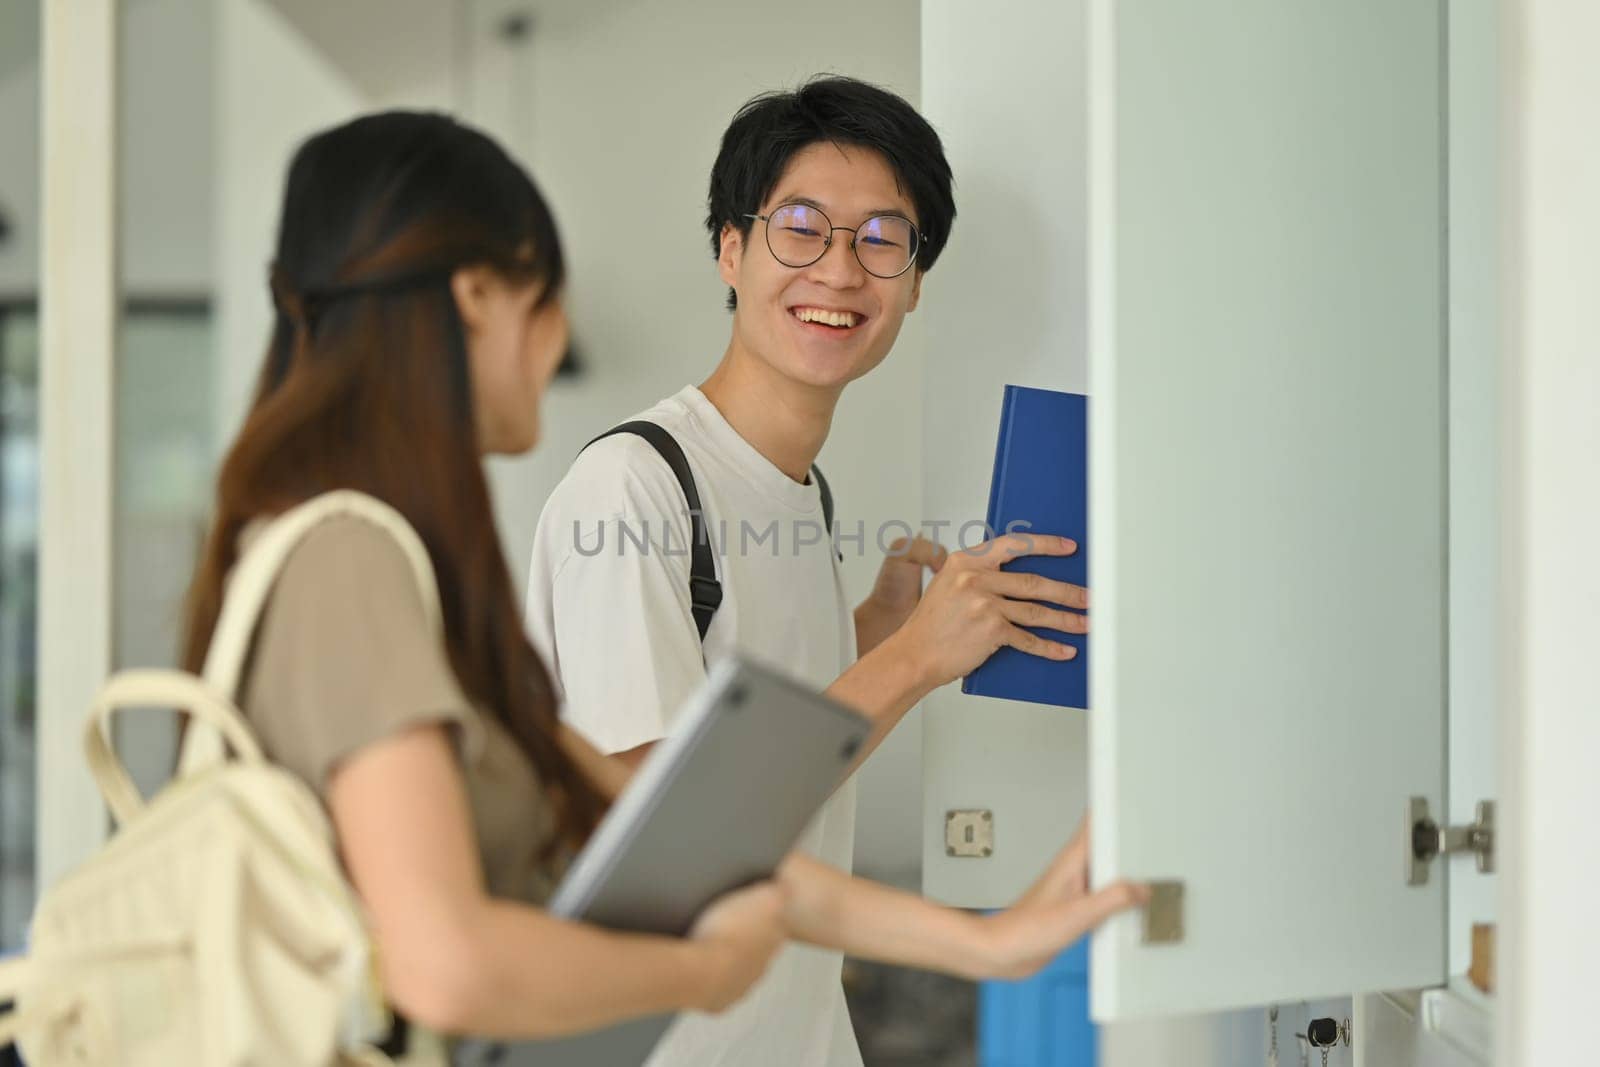 Two young college friends talking while standing at lockers in campus hallway. Education, Learning and technology concept by prathanchorruangsak